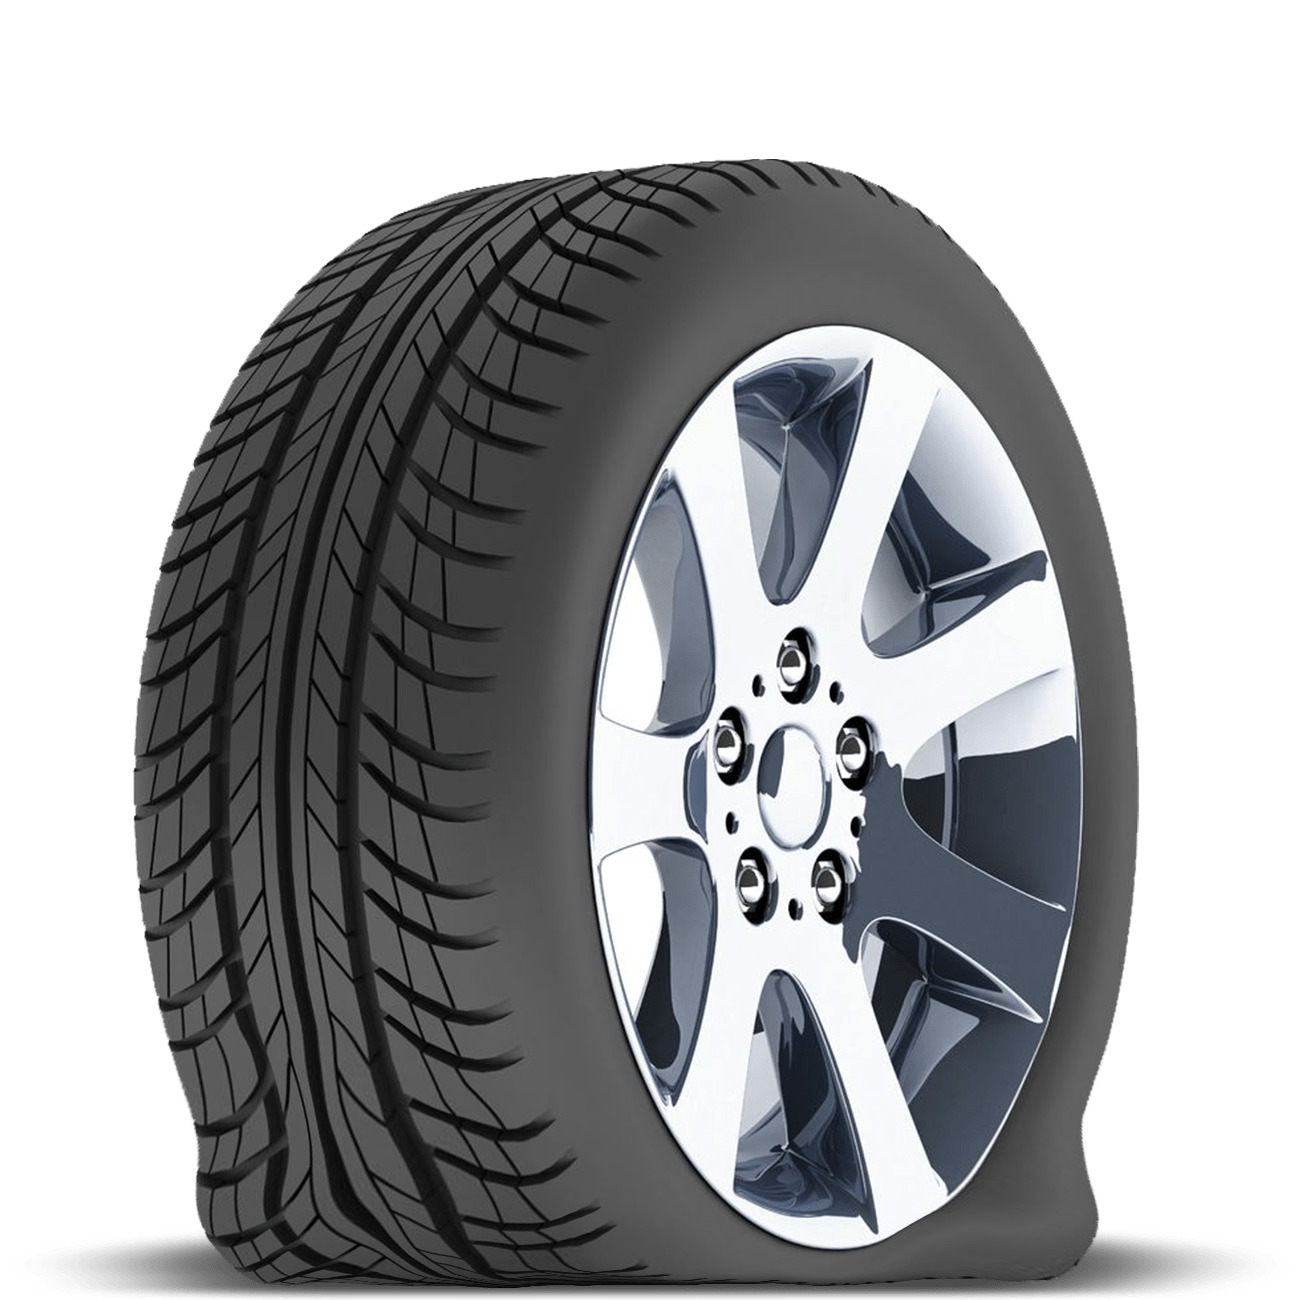 Flat Tyre PNG icons